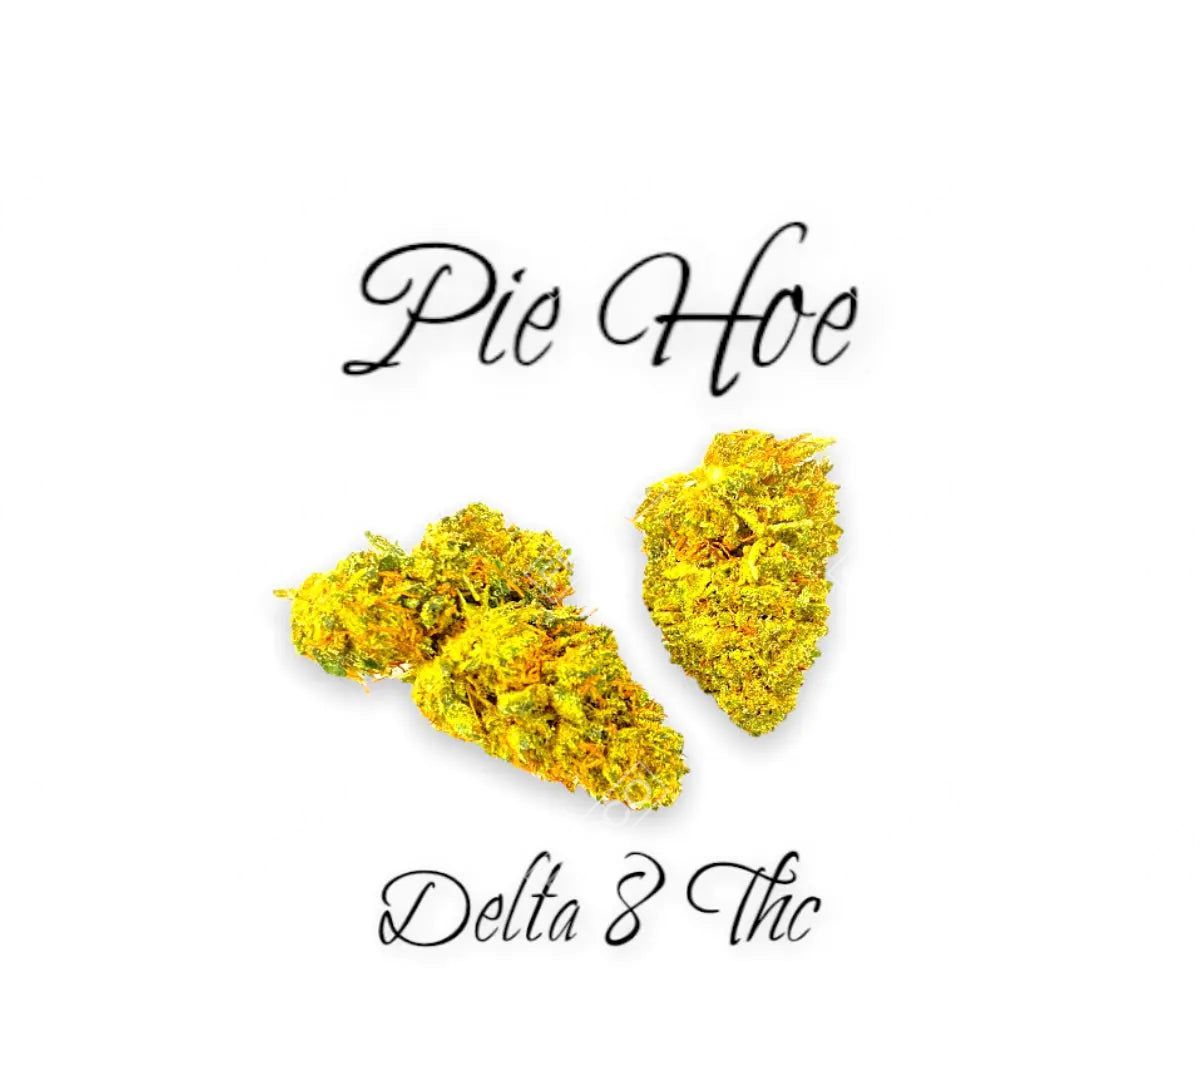 PIE HOE DELTA 8 THC by frisco labs